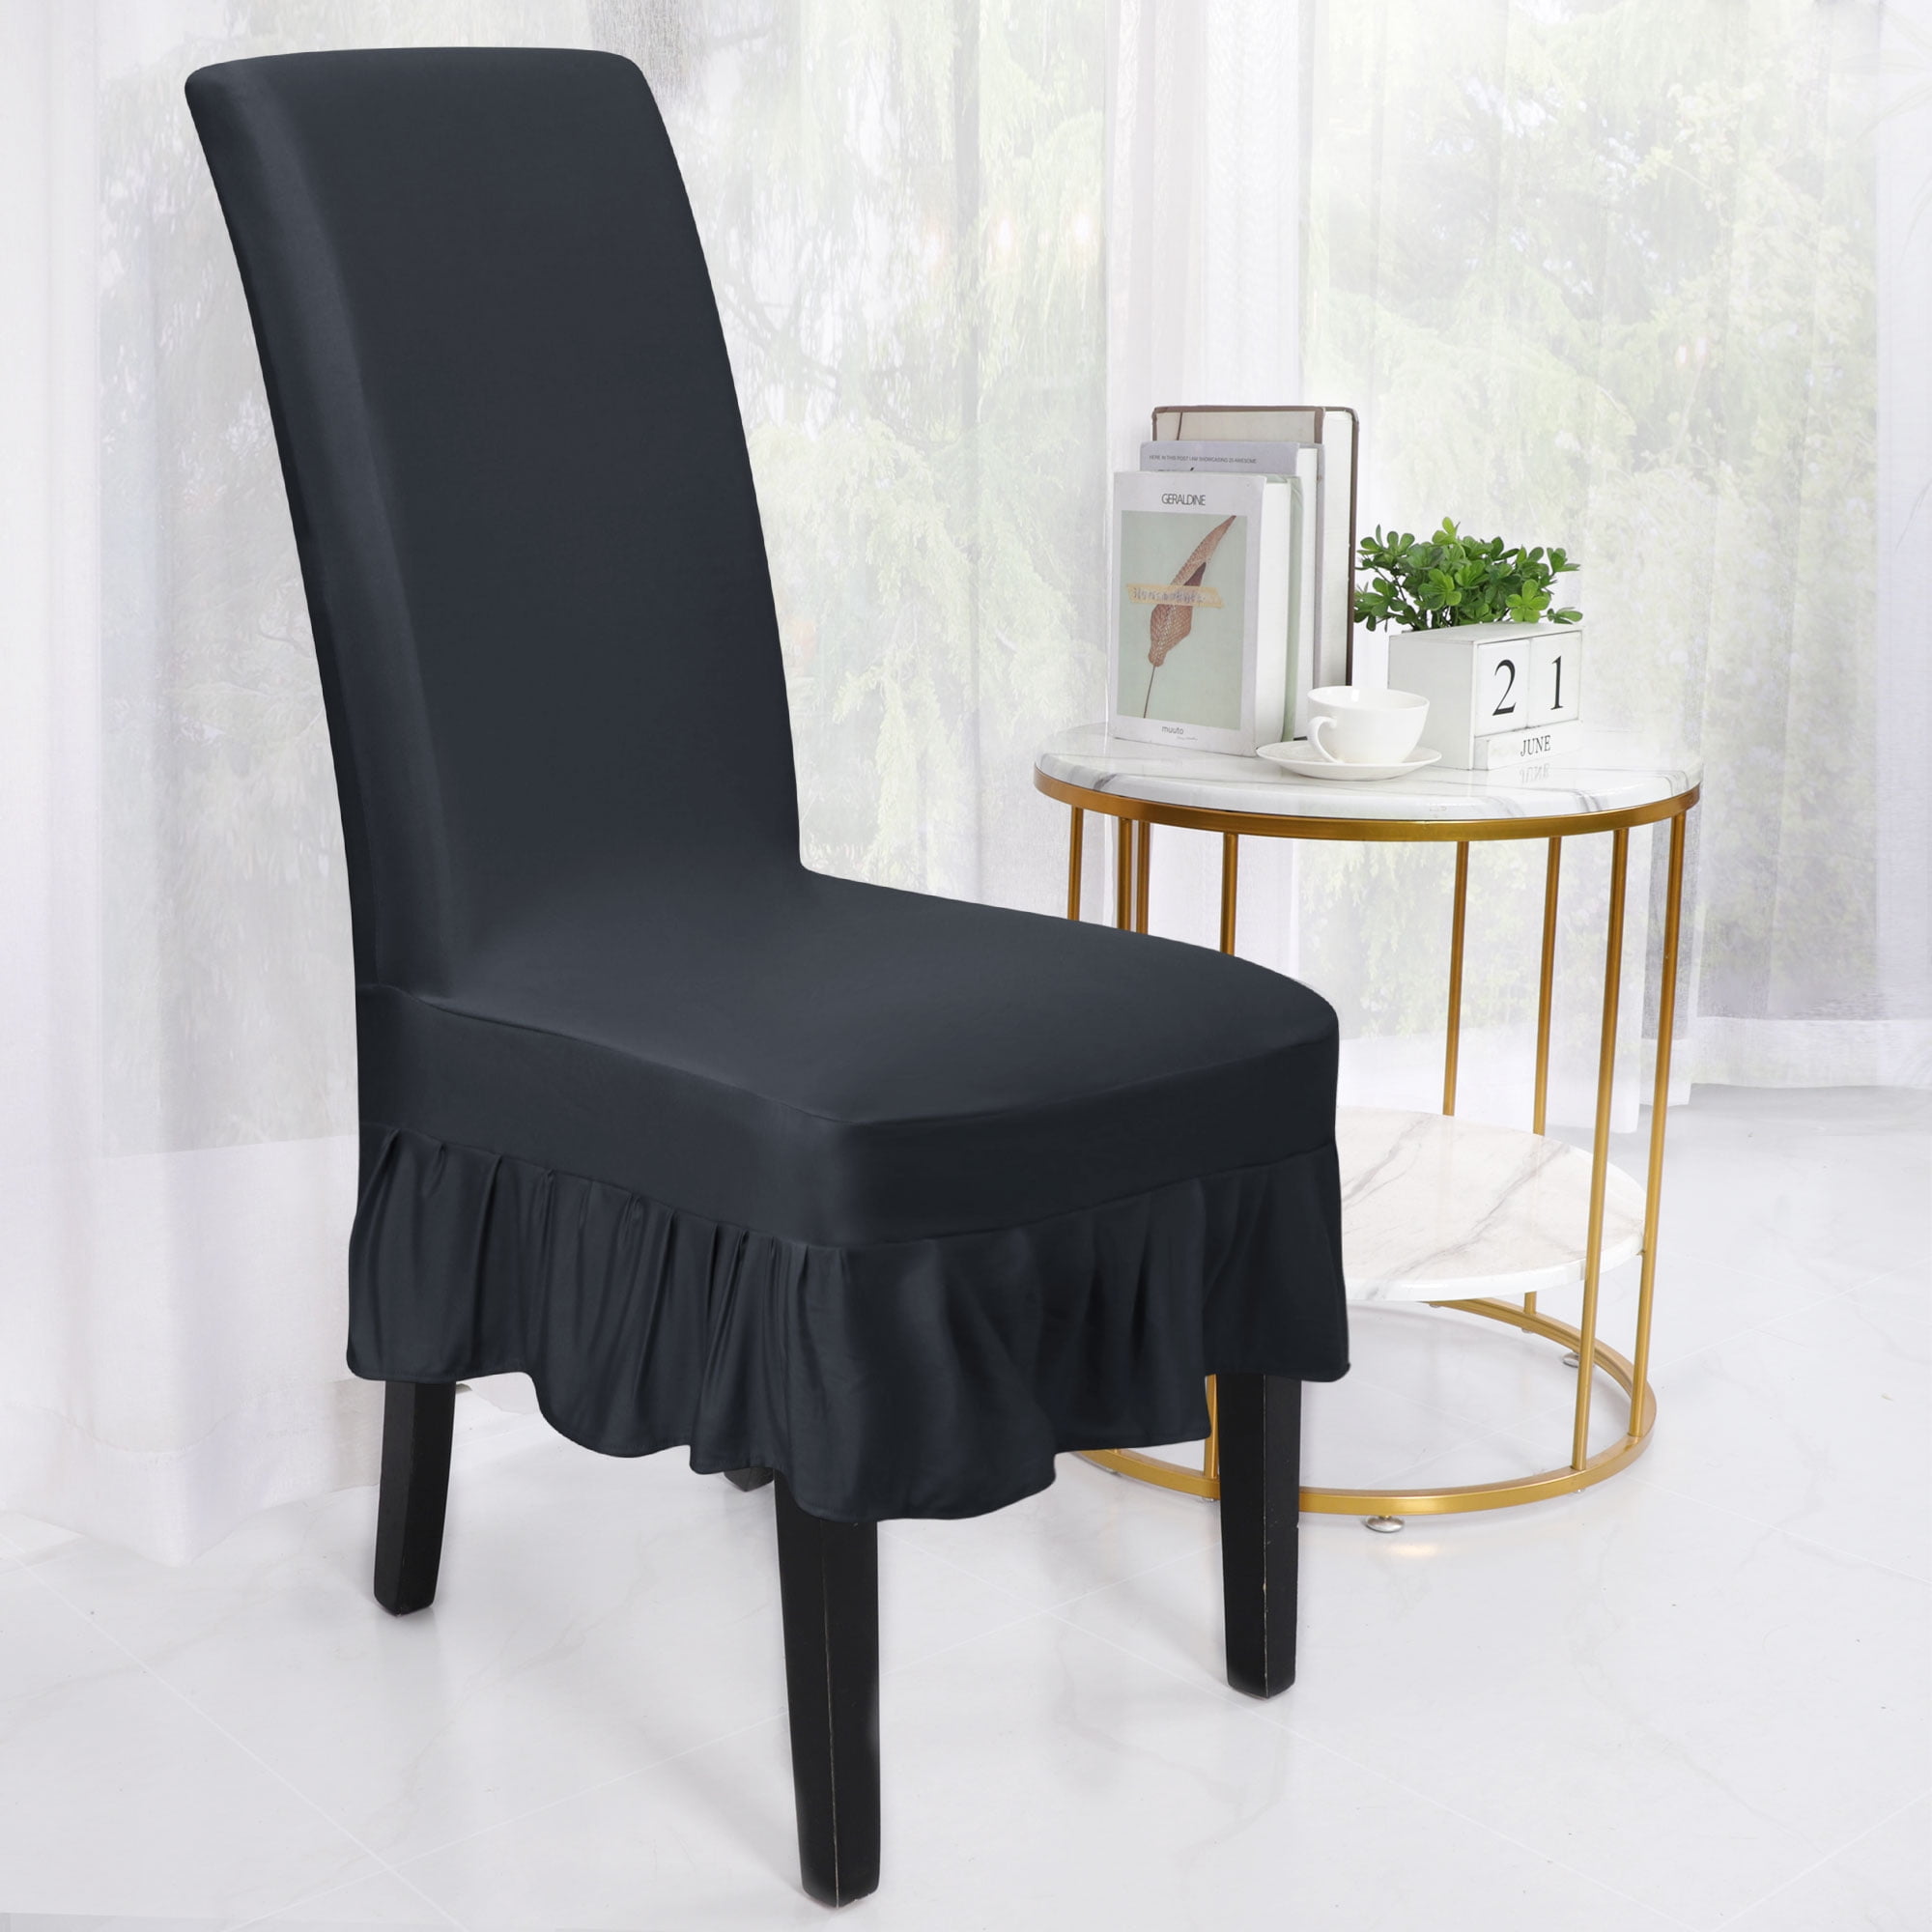 Details about   PU Leather Dining Chair Cover Slipcover Stretch Wedding Home Replace Protector 